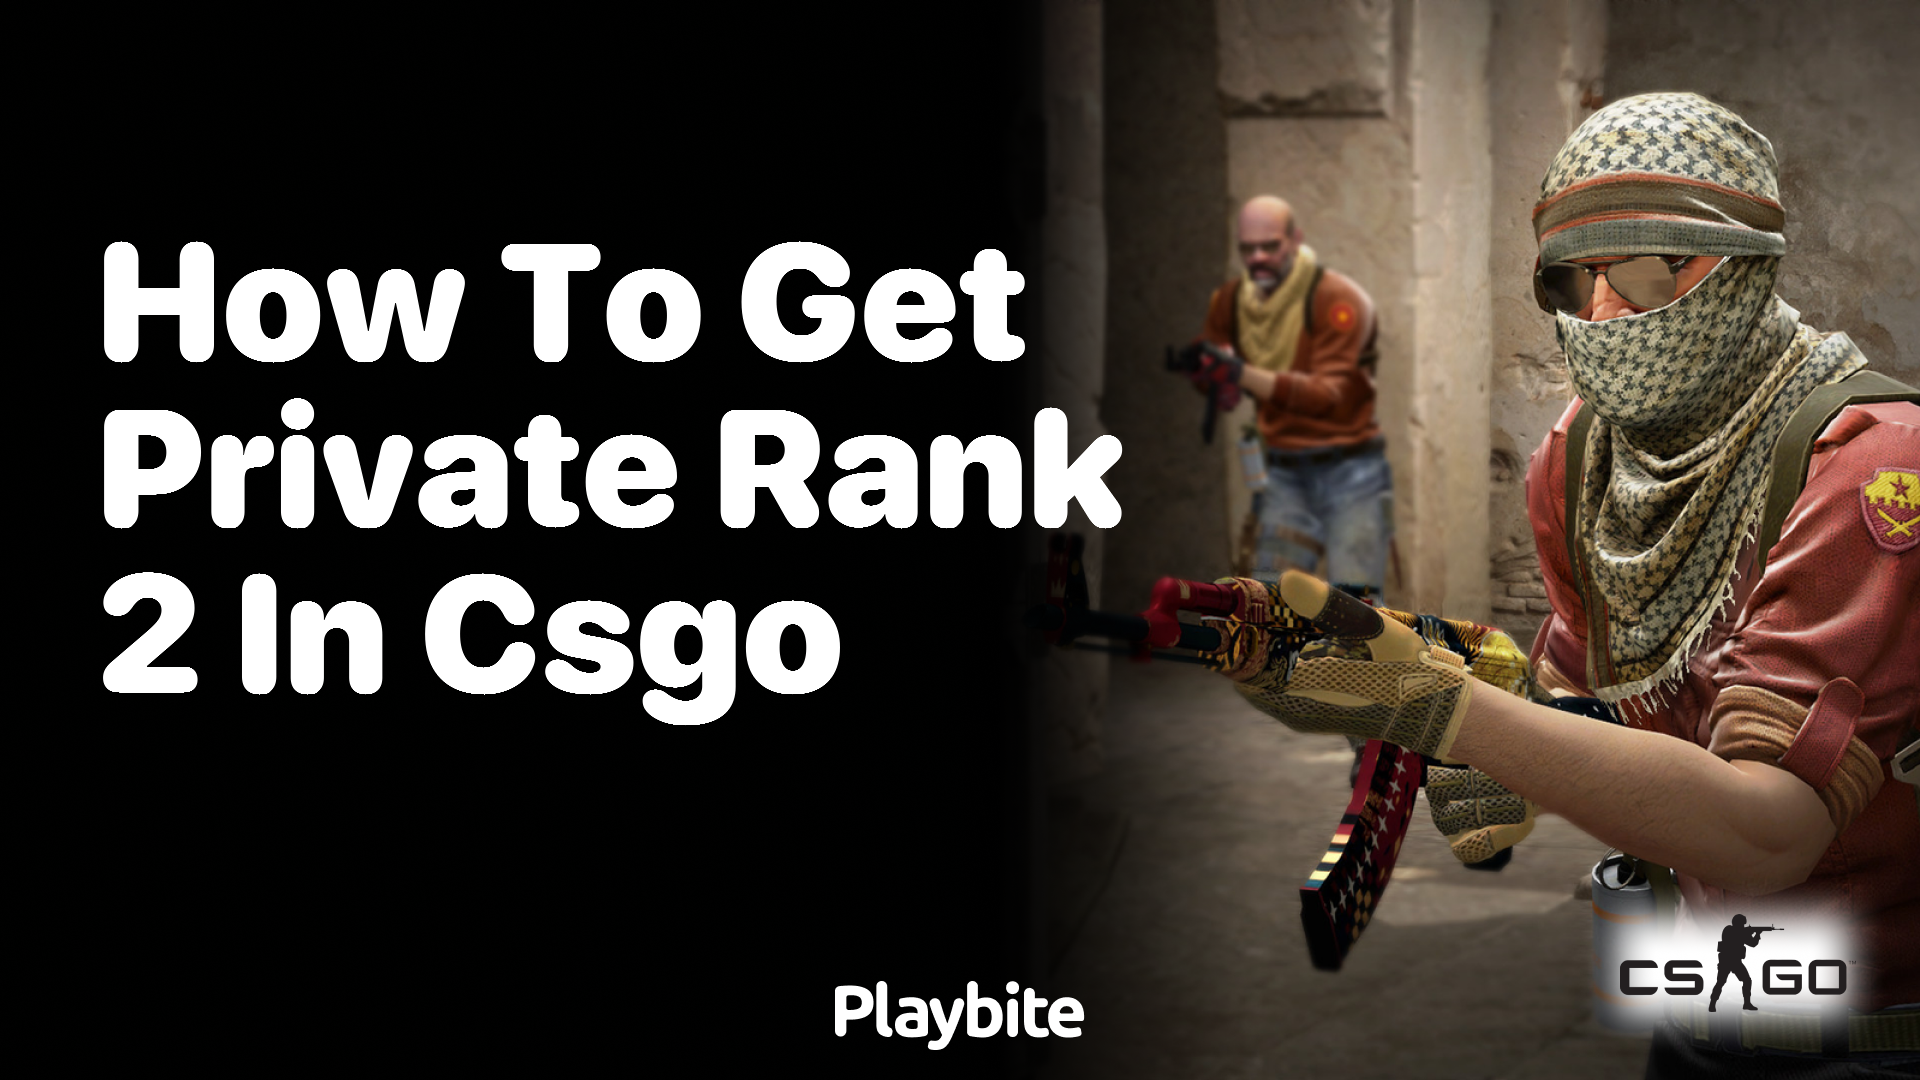 How to Get Private Rank 2 in CS:GO